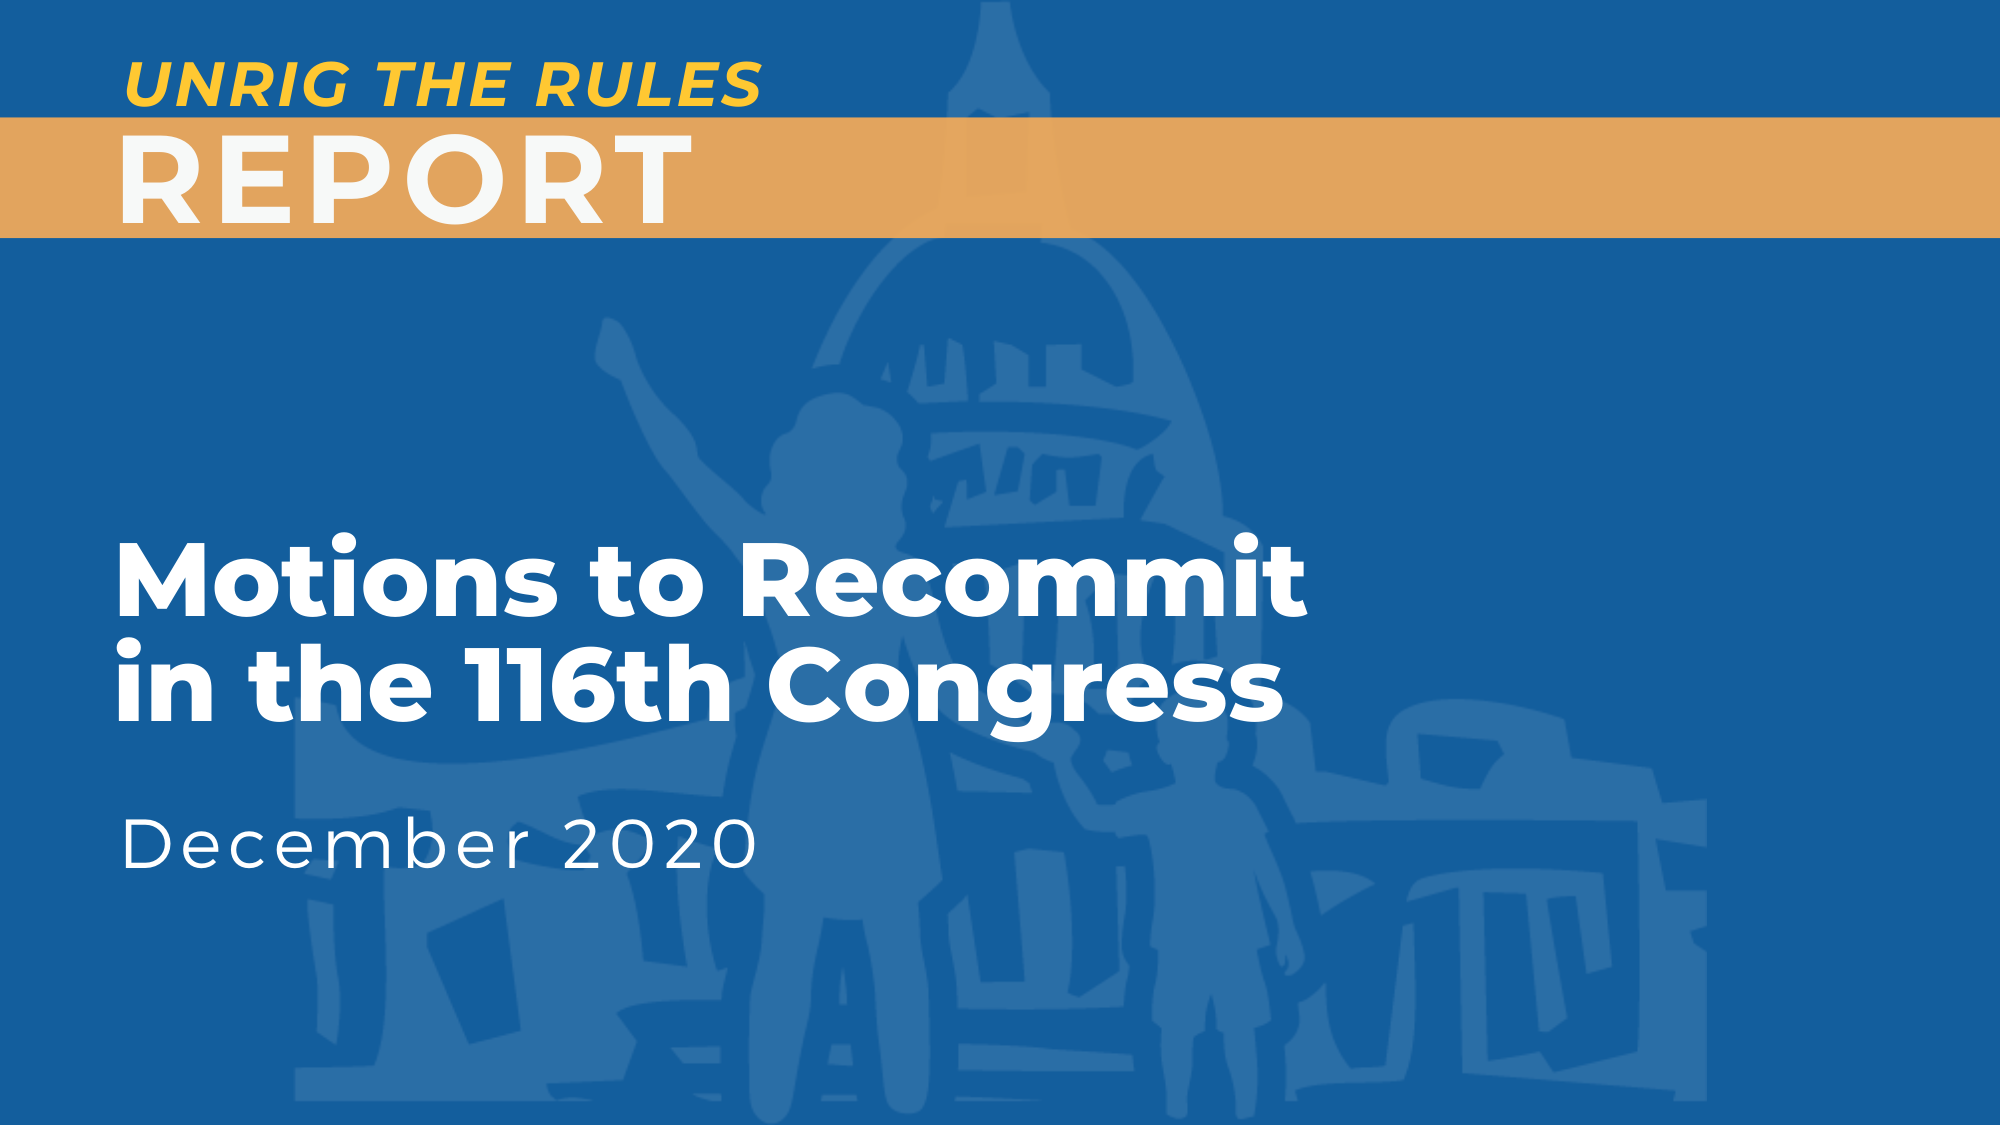 Motions to Recommit in the 116th Congress